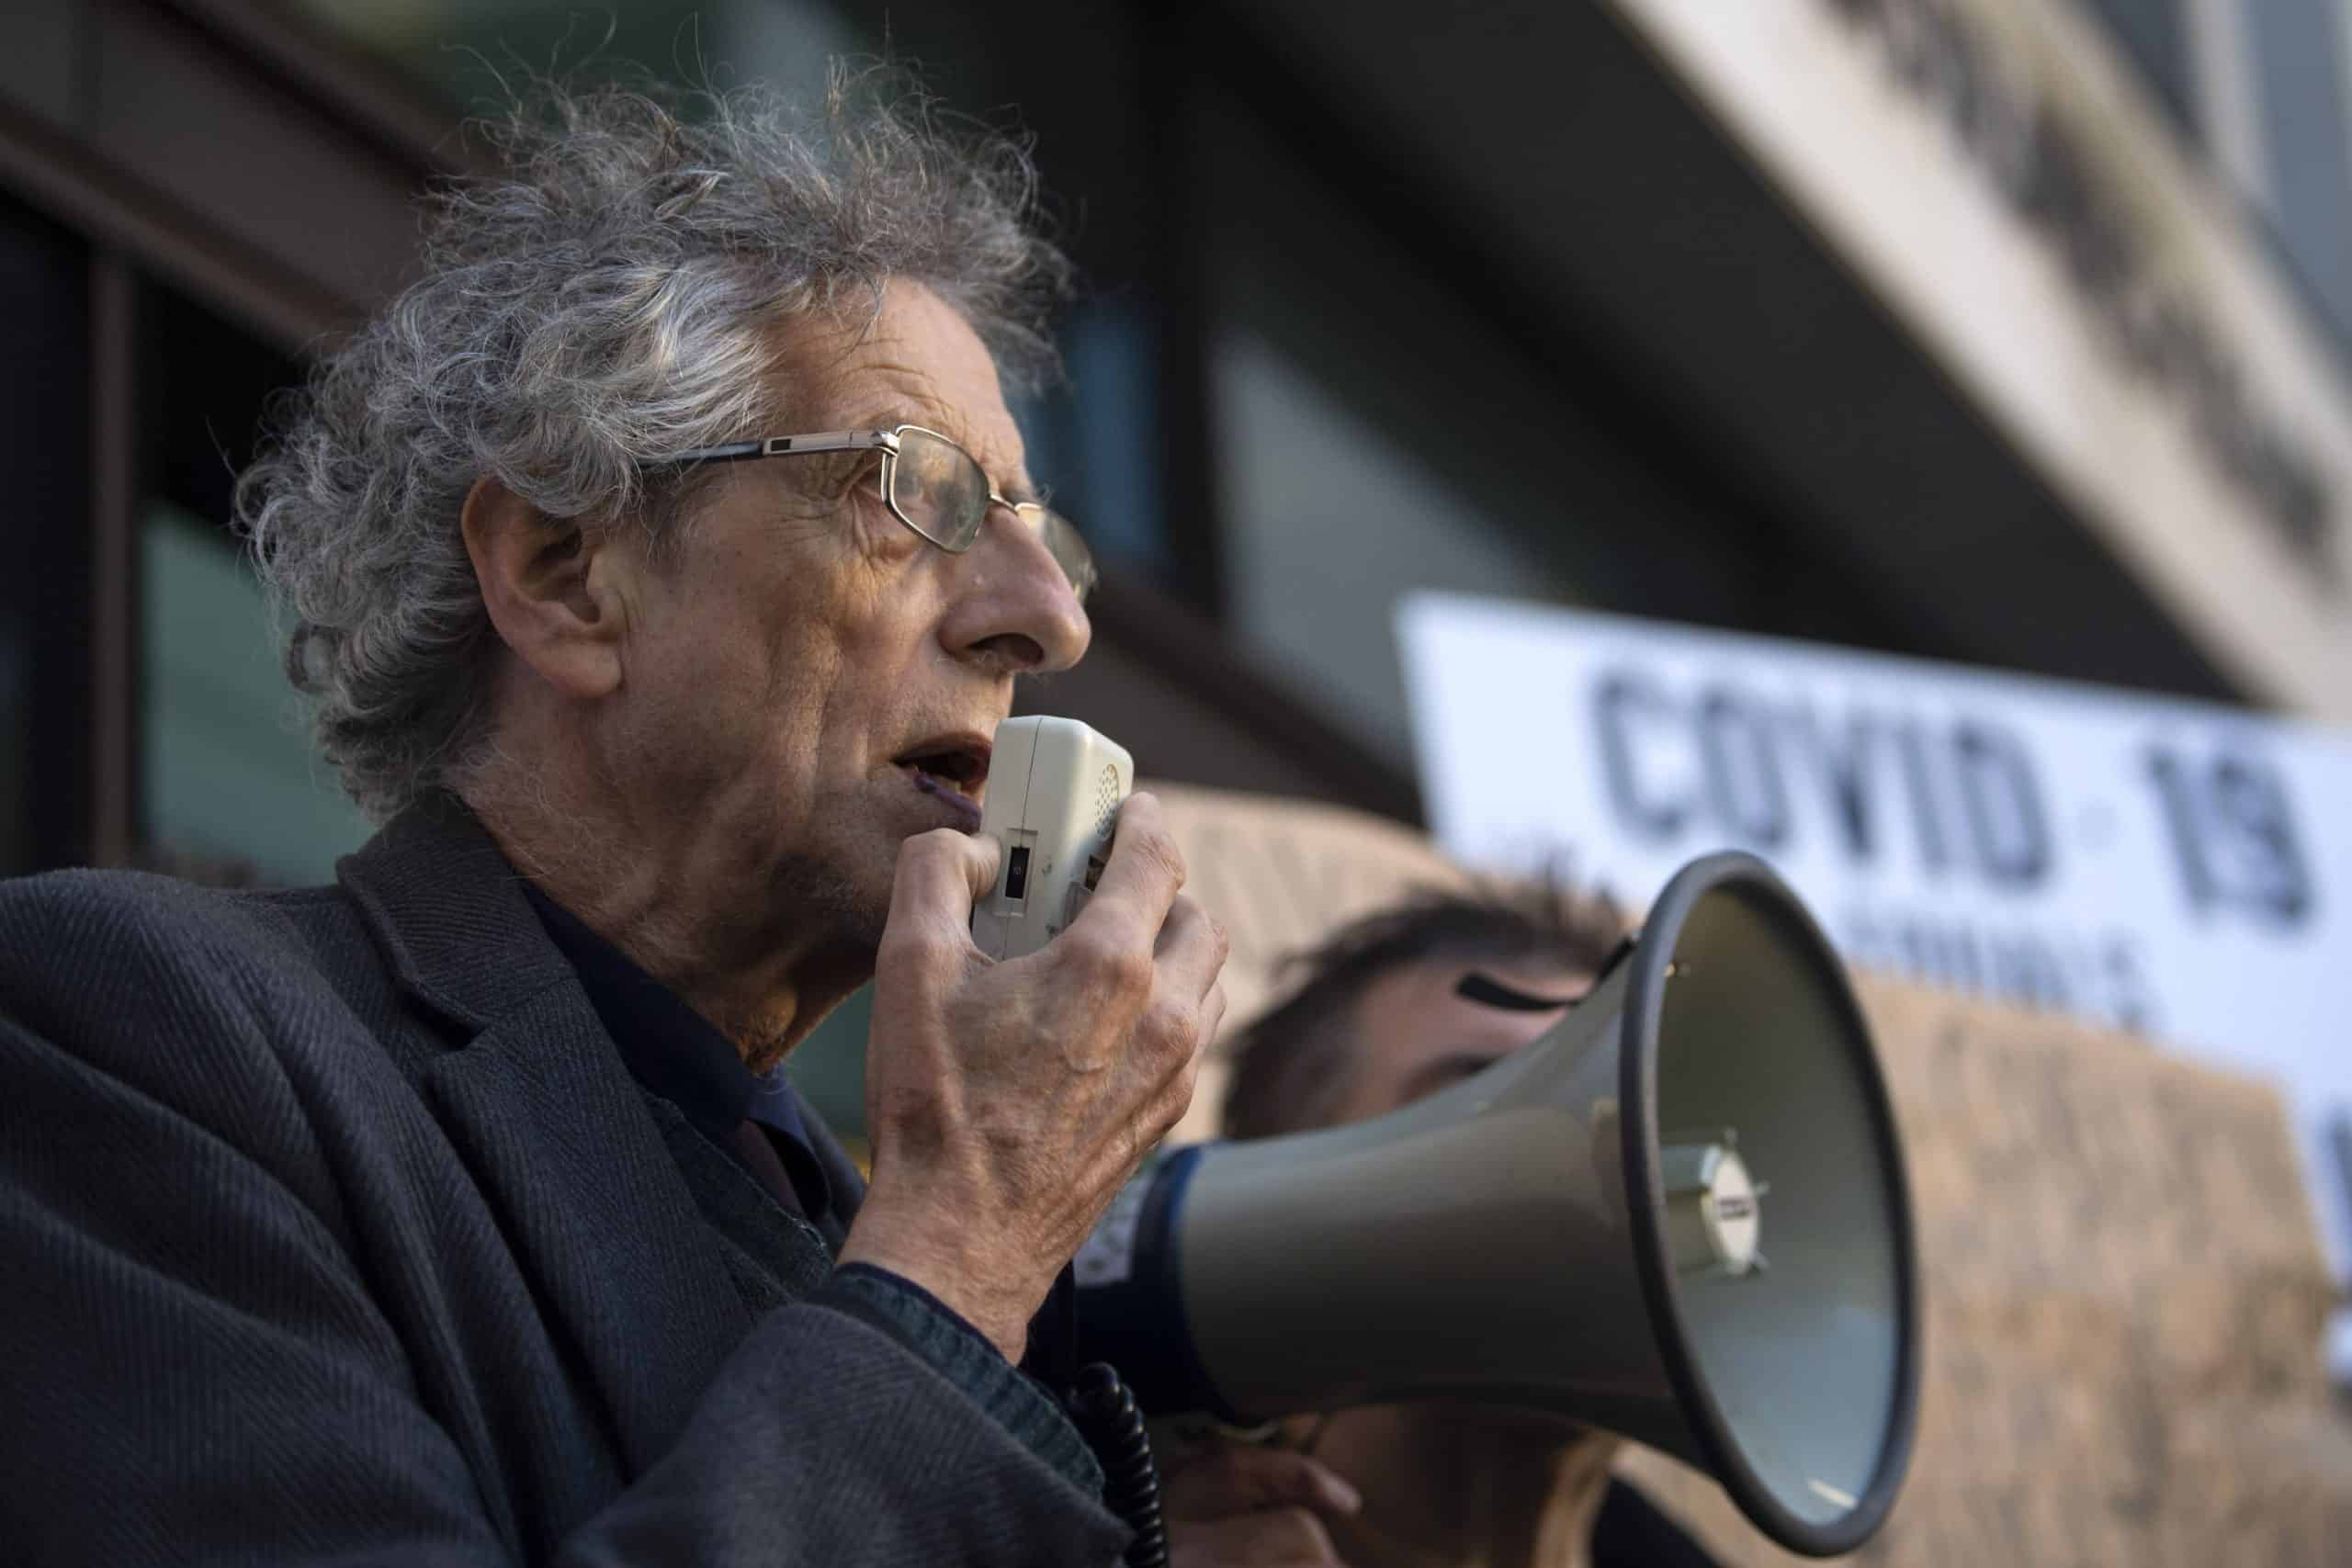 Piers Corbyn arrested over leaflets comparing vaccines to Auschwitz